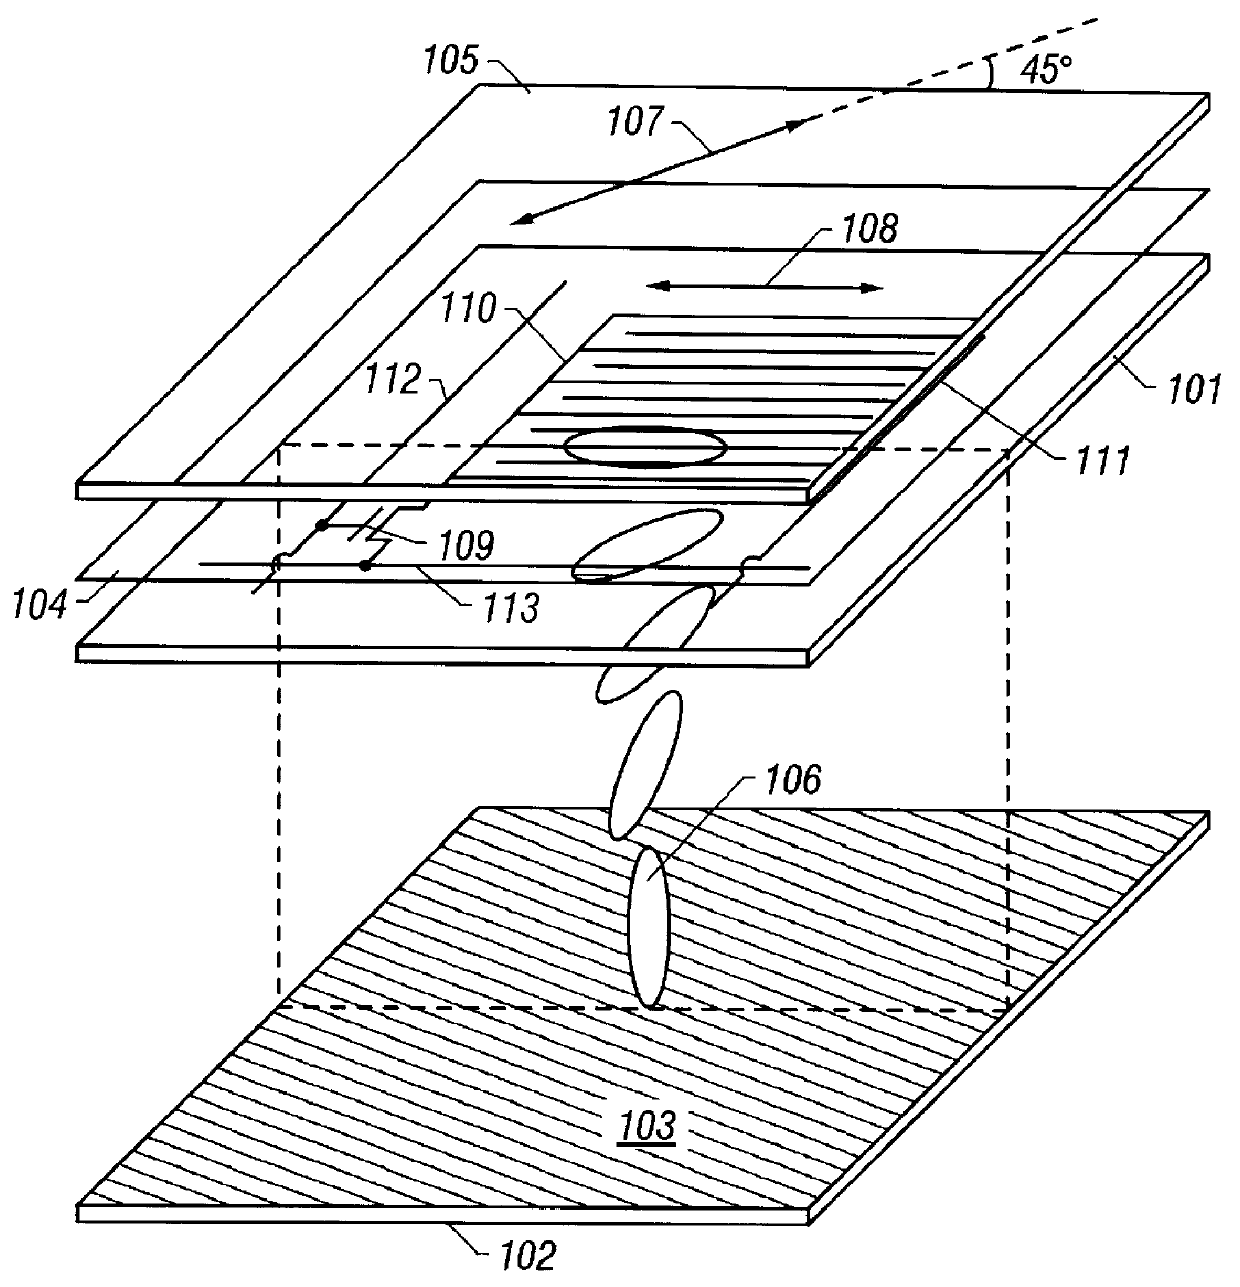 Interlayer insulation of TFT LCD device having of silicon oxide and silicon nitride